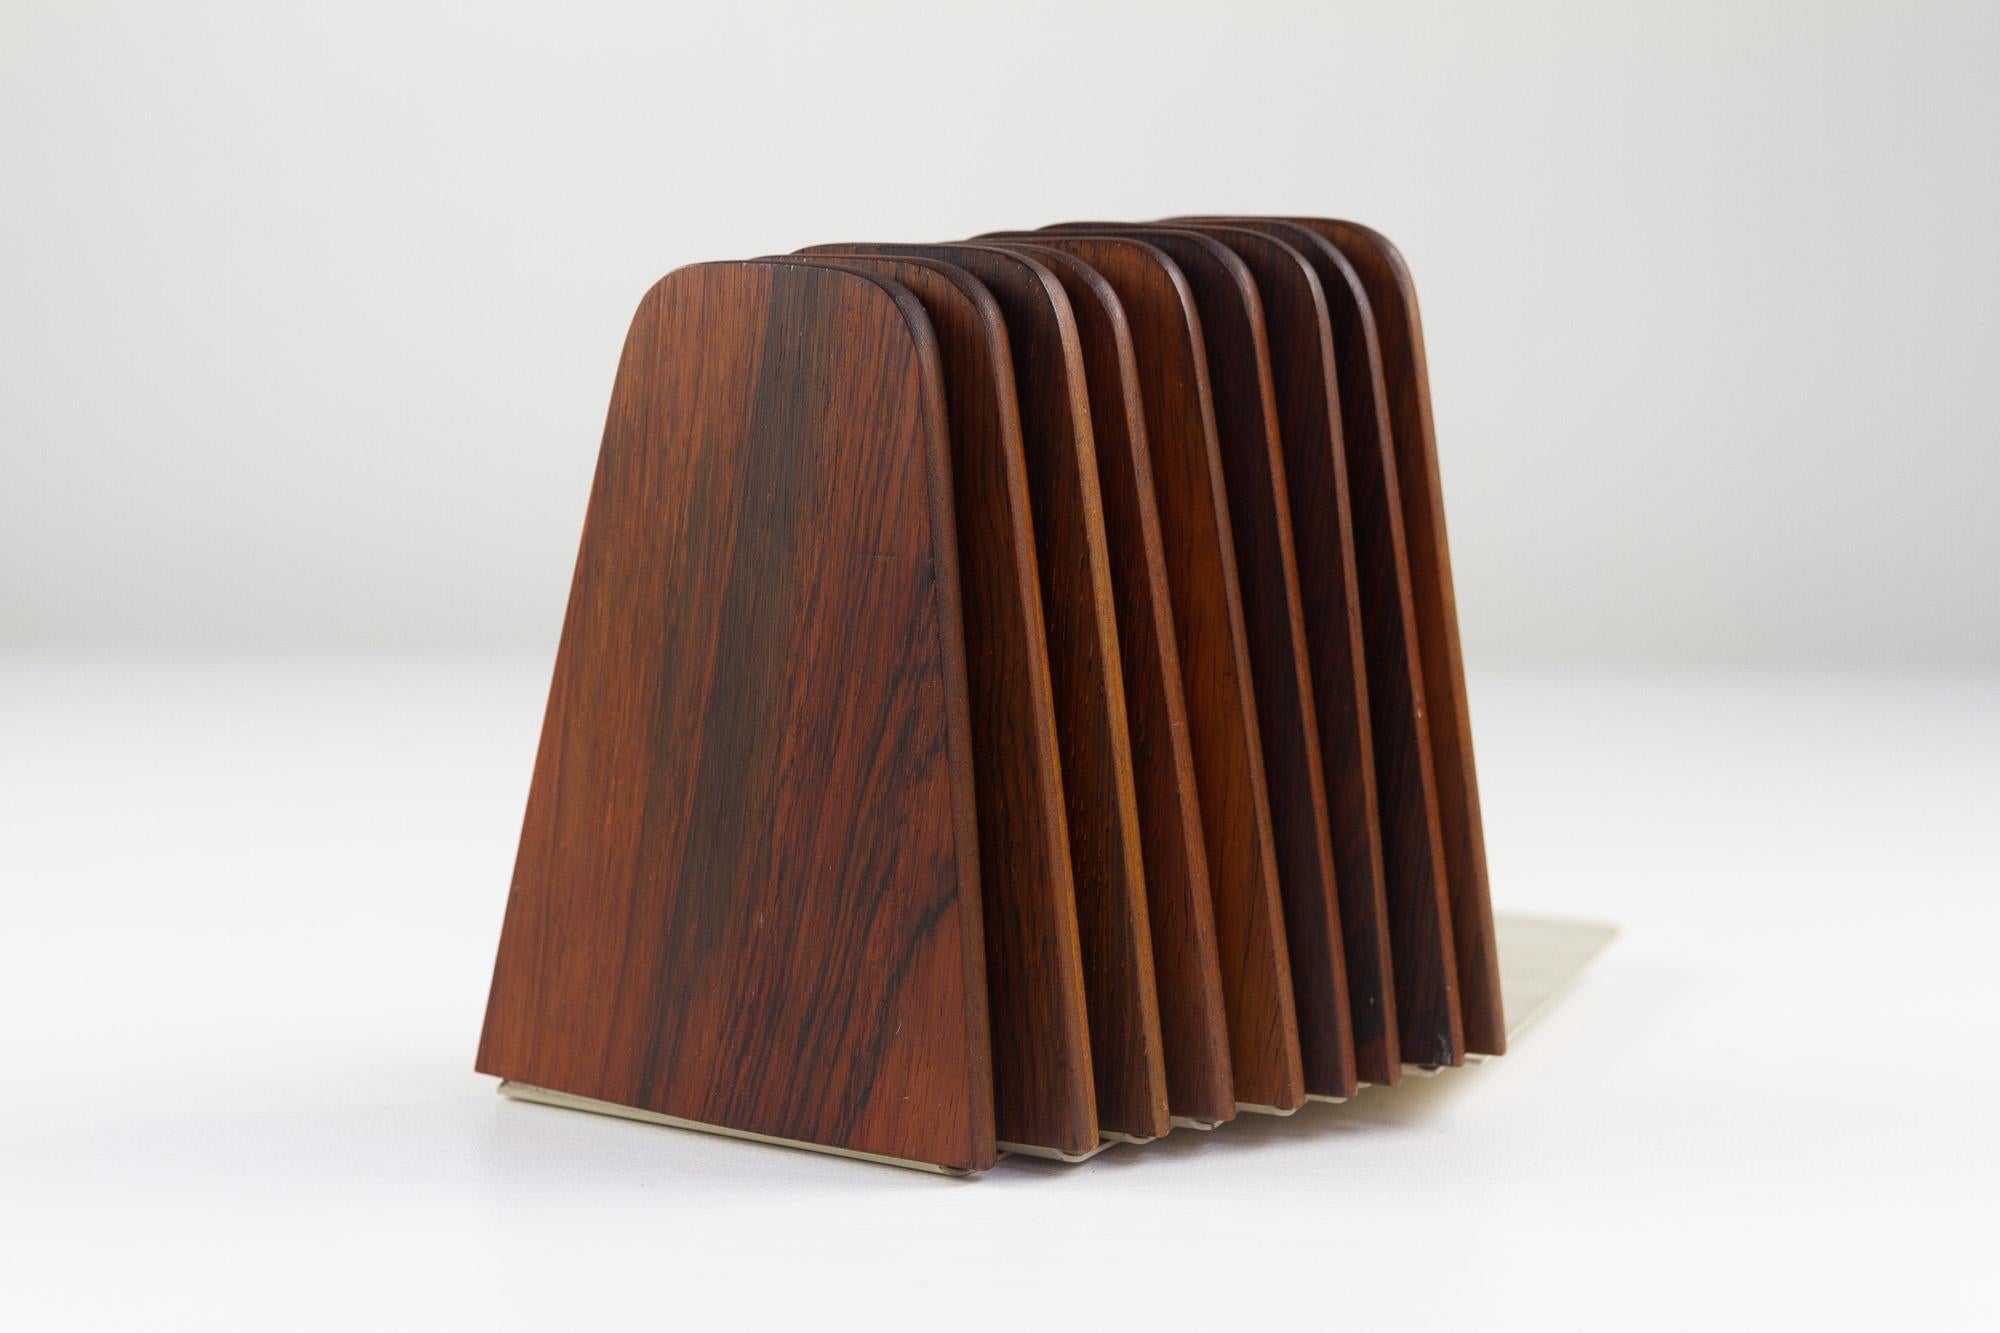 Mid-century bookends by Kai Kristiansen for FM 1960s, set of 9.
Very decorative Danish modern bookends in rosewood and metal designed by Danish designer Kai Kristiansen for Feldballes Møbelfabrik. Made as a supplement to FM Reolen wall unit